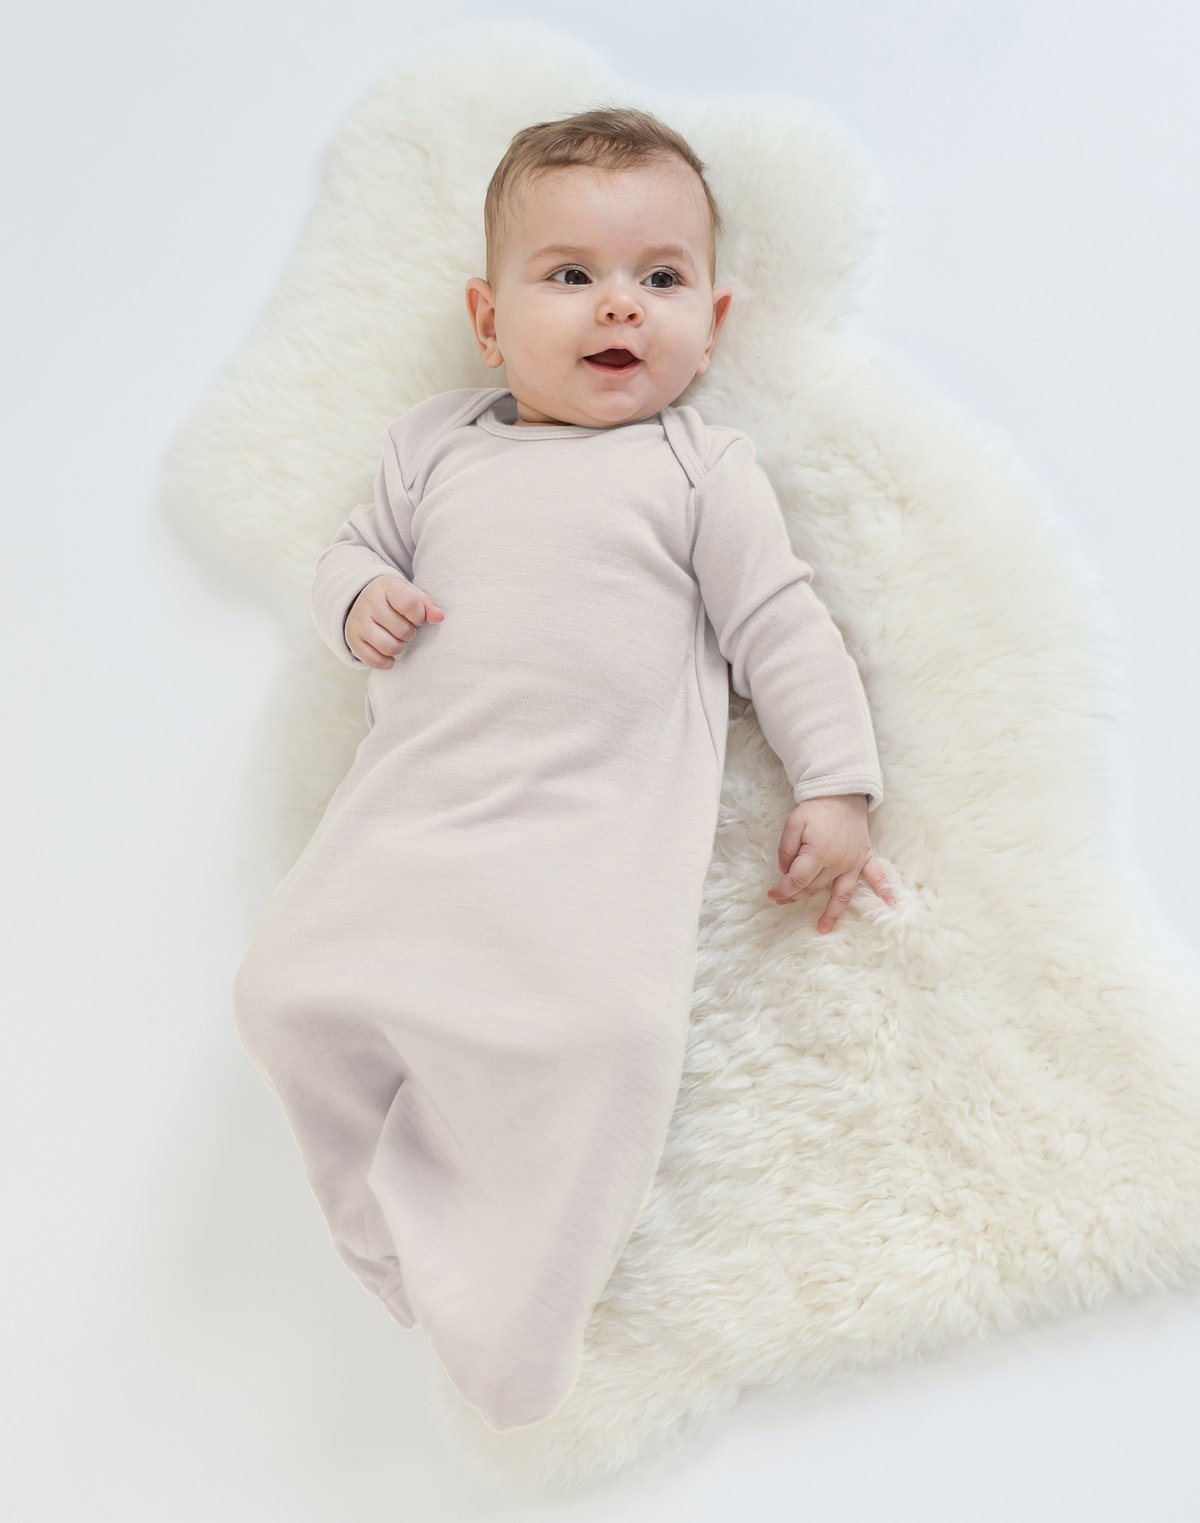 Woolino Infant Gown, 100% Superfine Merino Wool, for Babies 0-6 Months